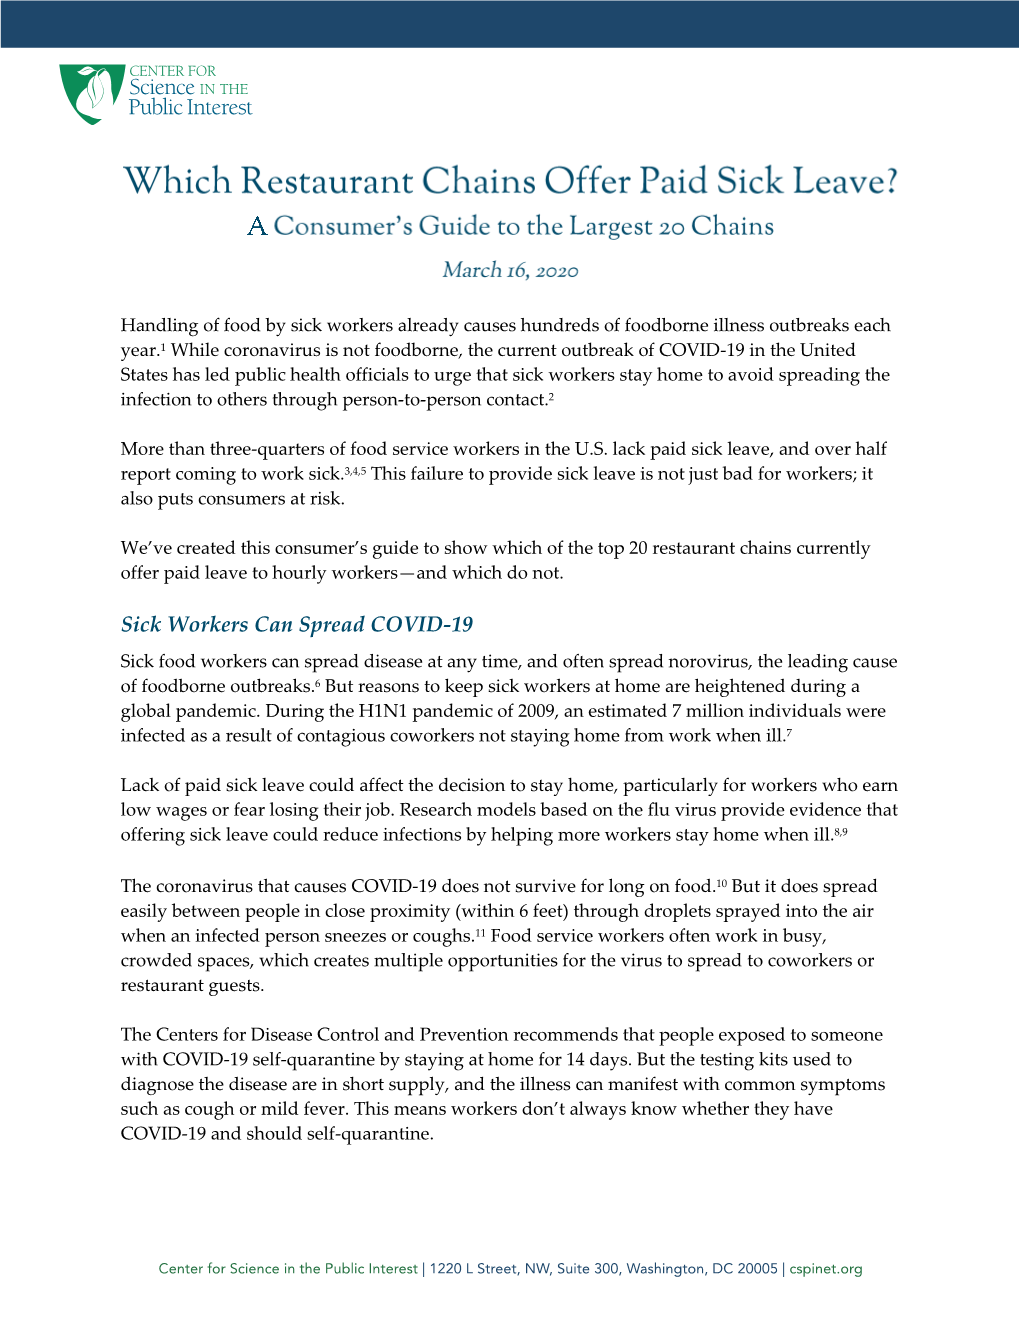 Restaurant Chains Currently Offer Paid Leave to Hourly Workers—And Which Do Not